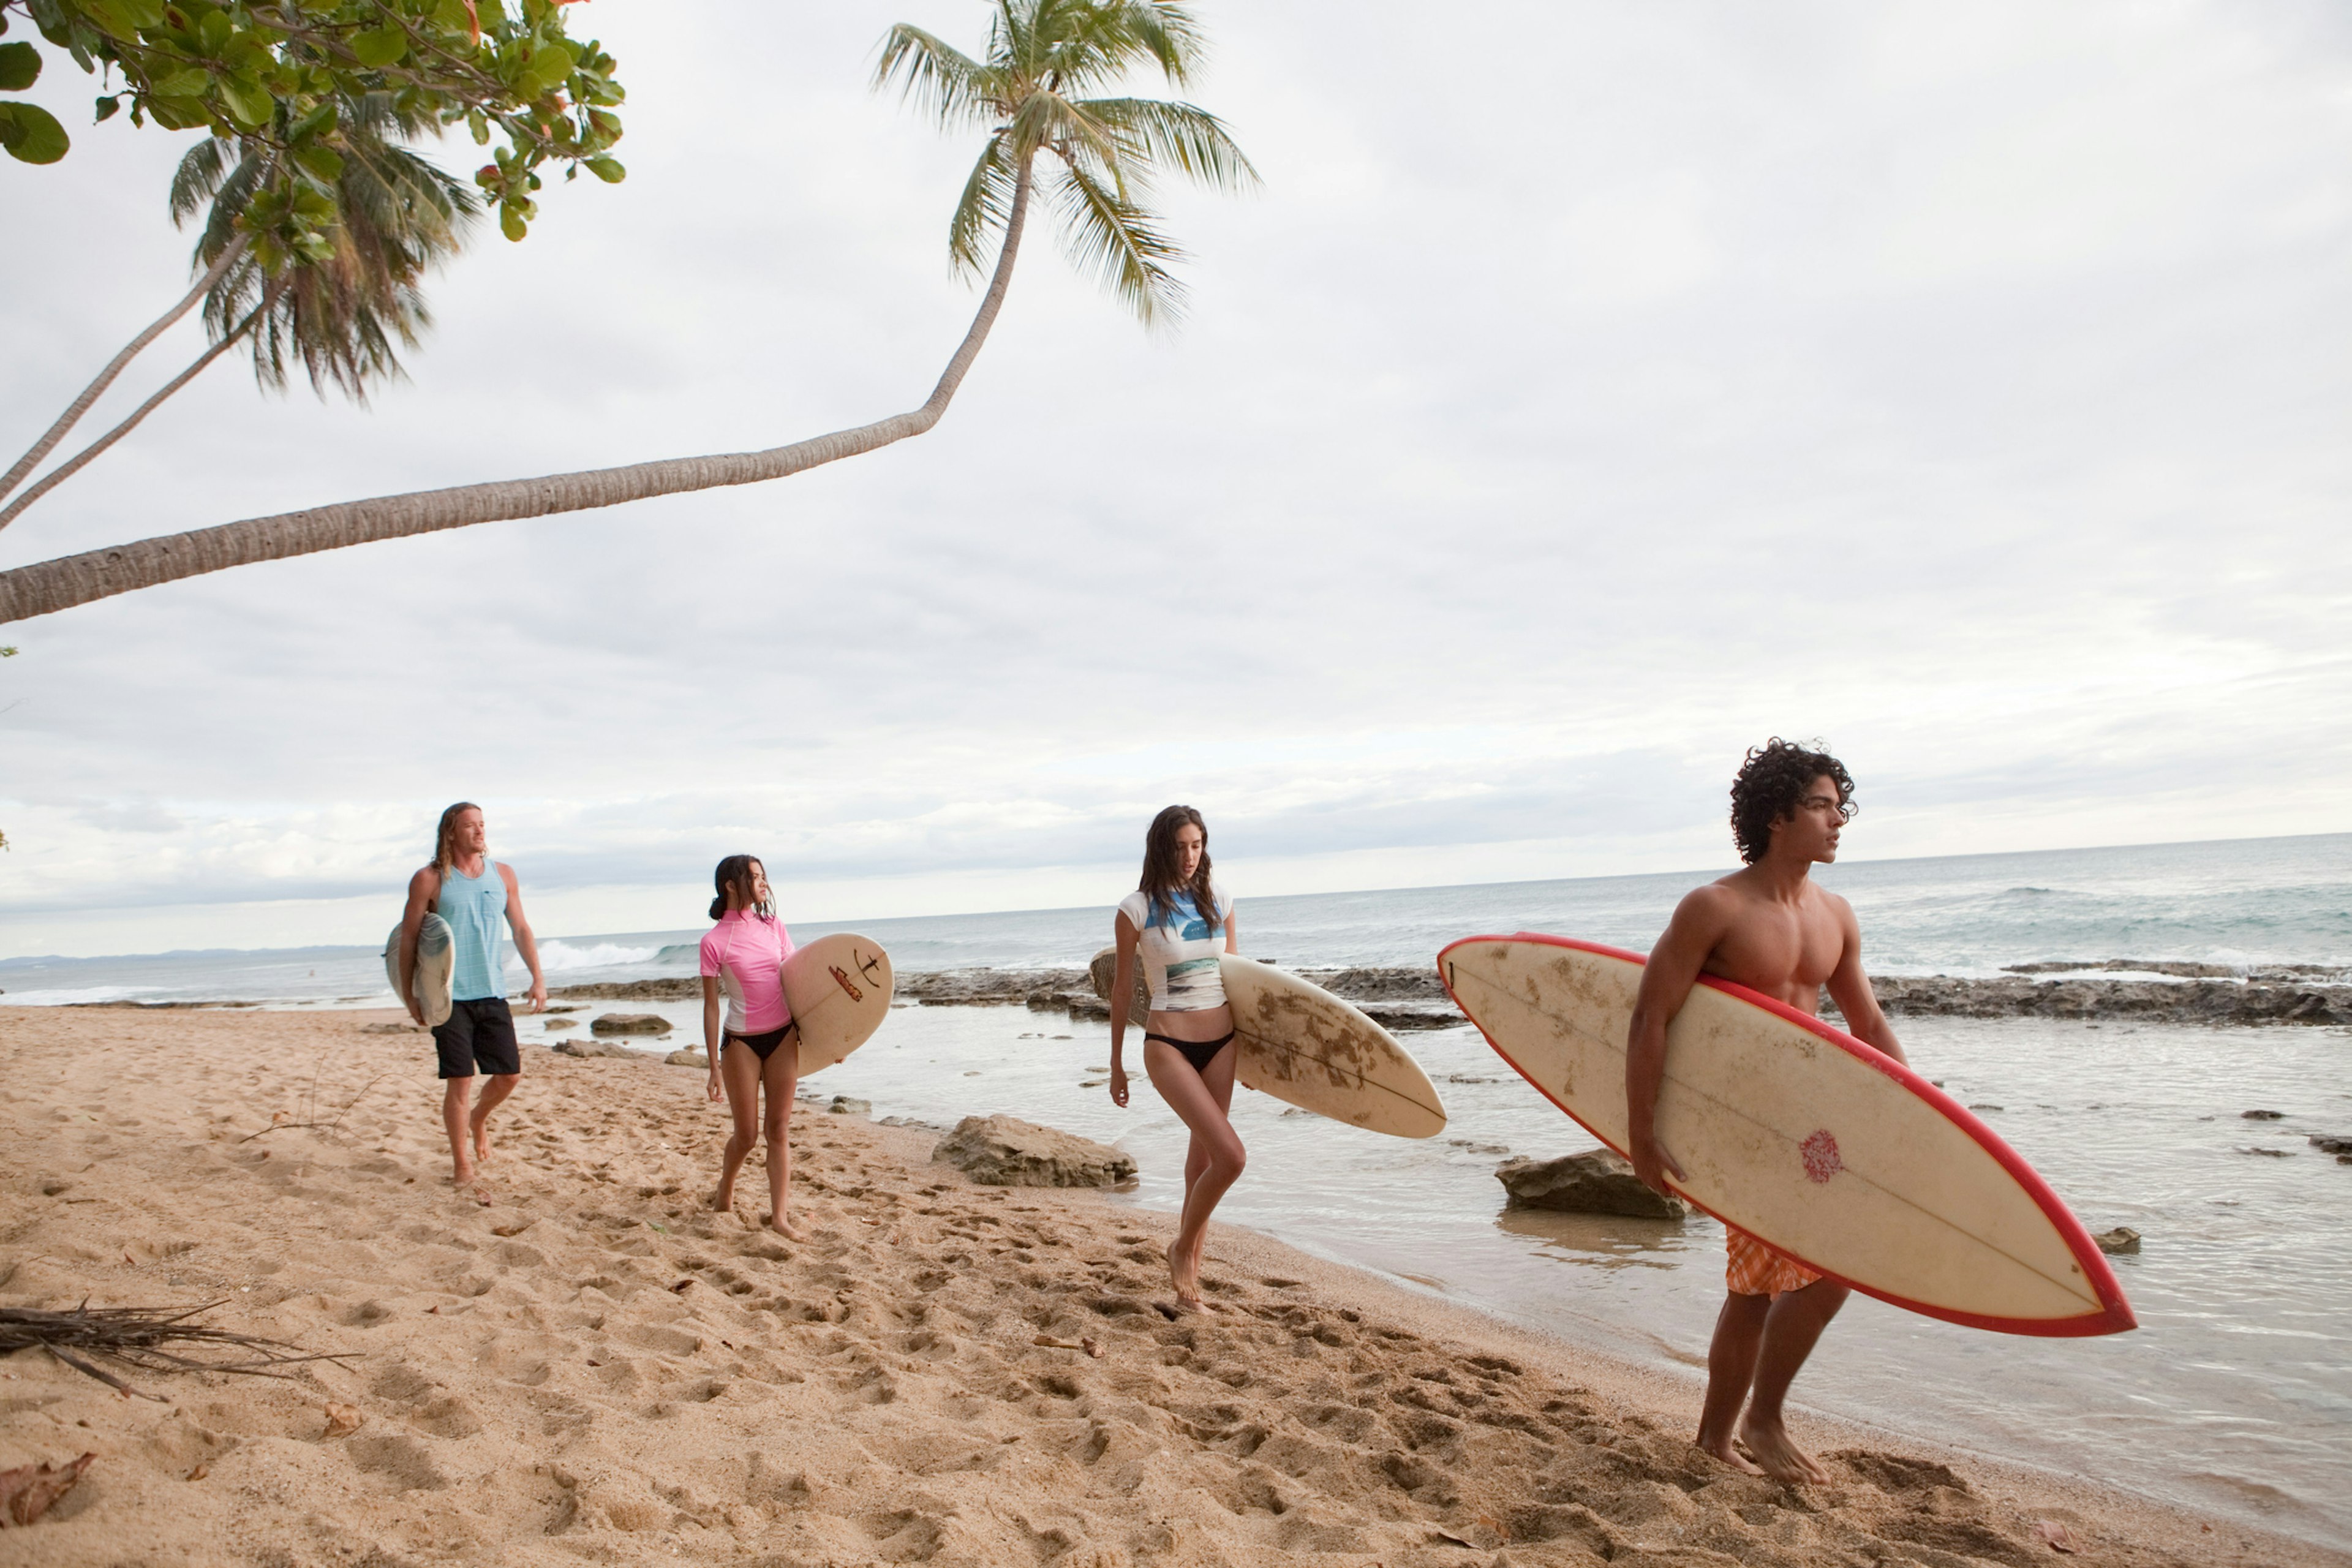 Four young friends carrying surfboards on beach